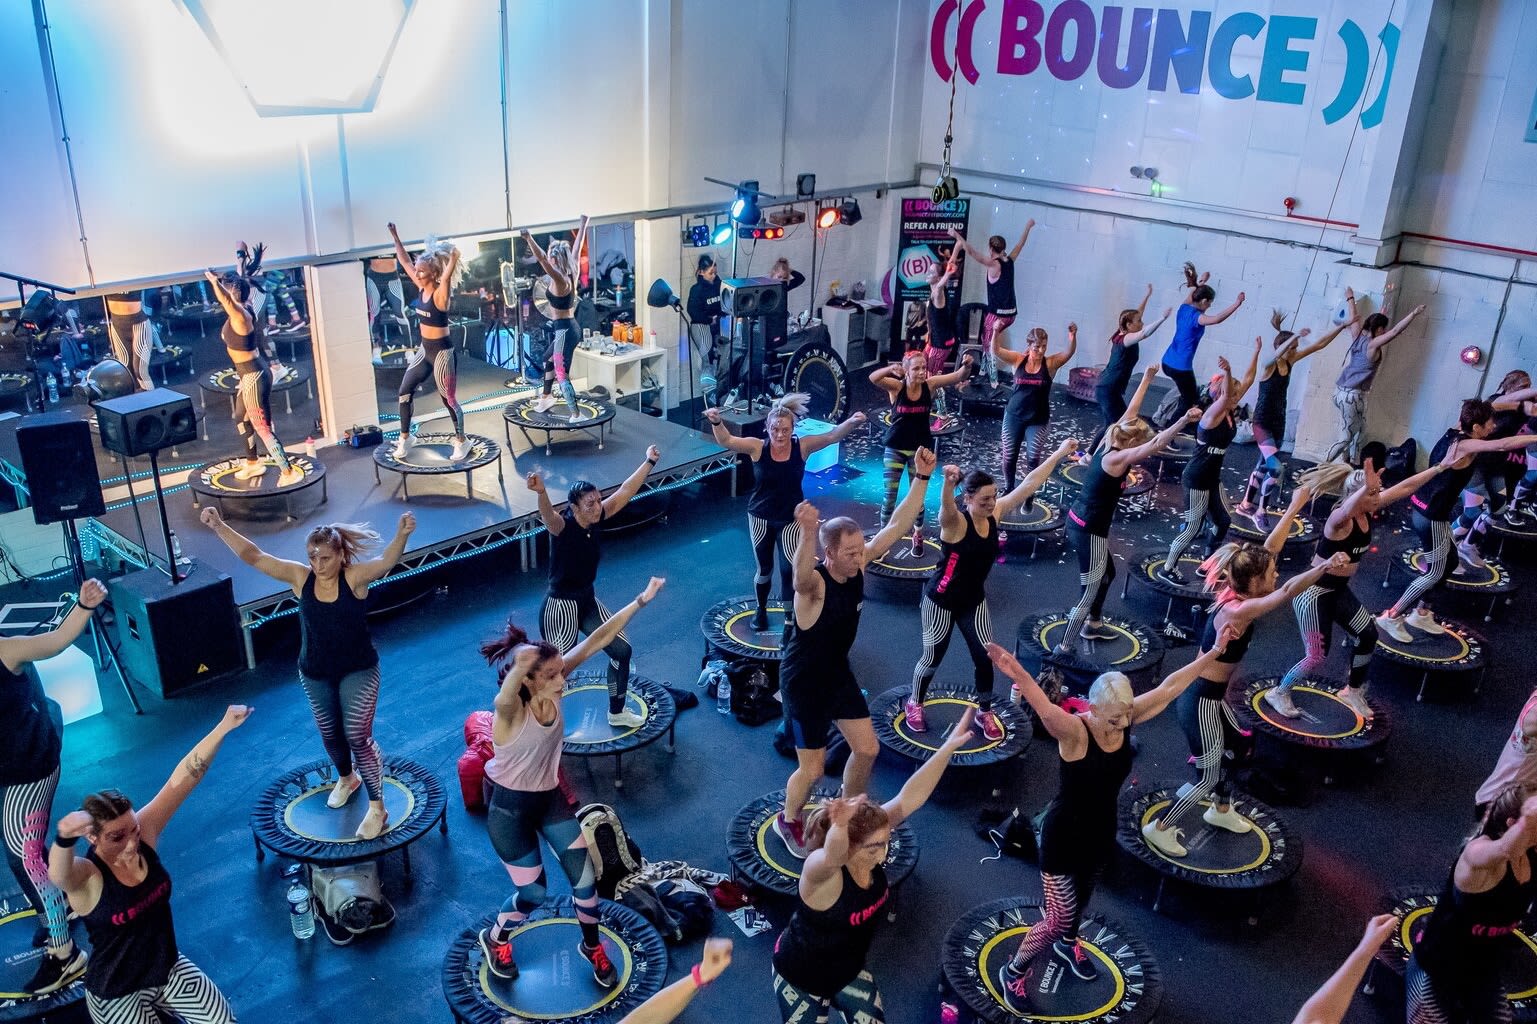 BOUNCE)) - Moseley: Read Reviews and Book Classes on ClassPass